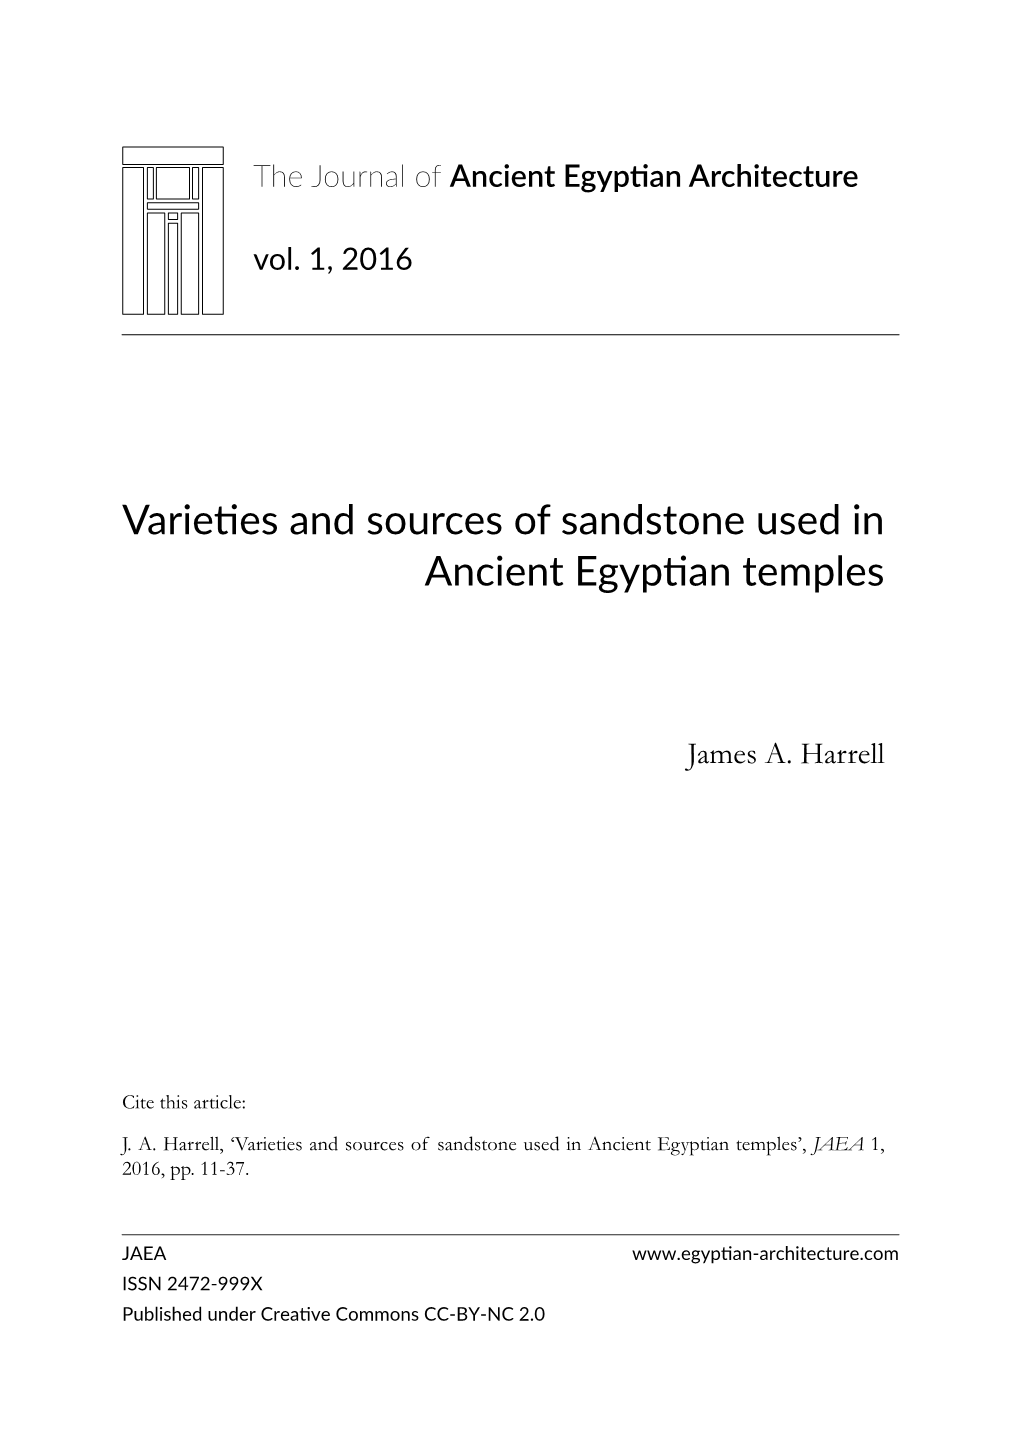 Varieties and Sources of Sandstone Used in Ancient Egyptian Temples